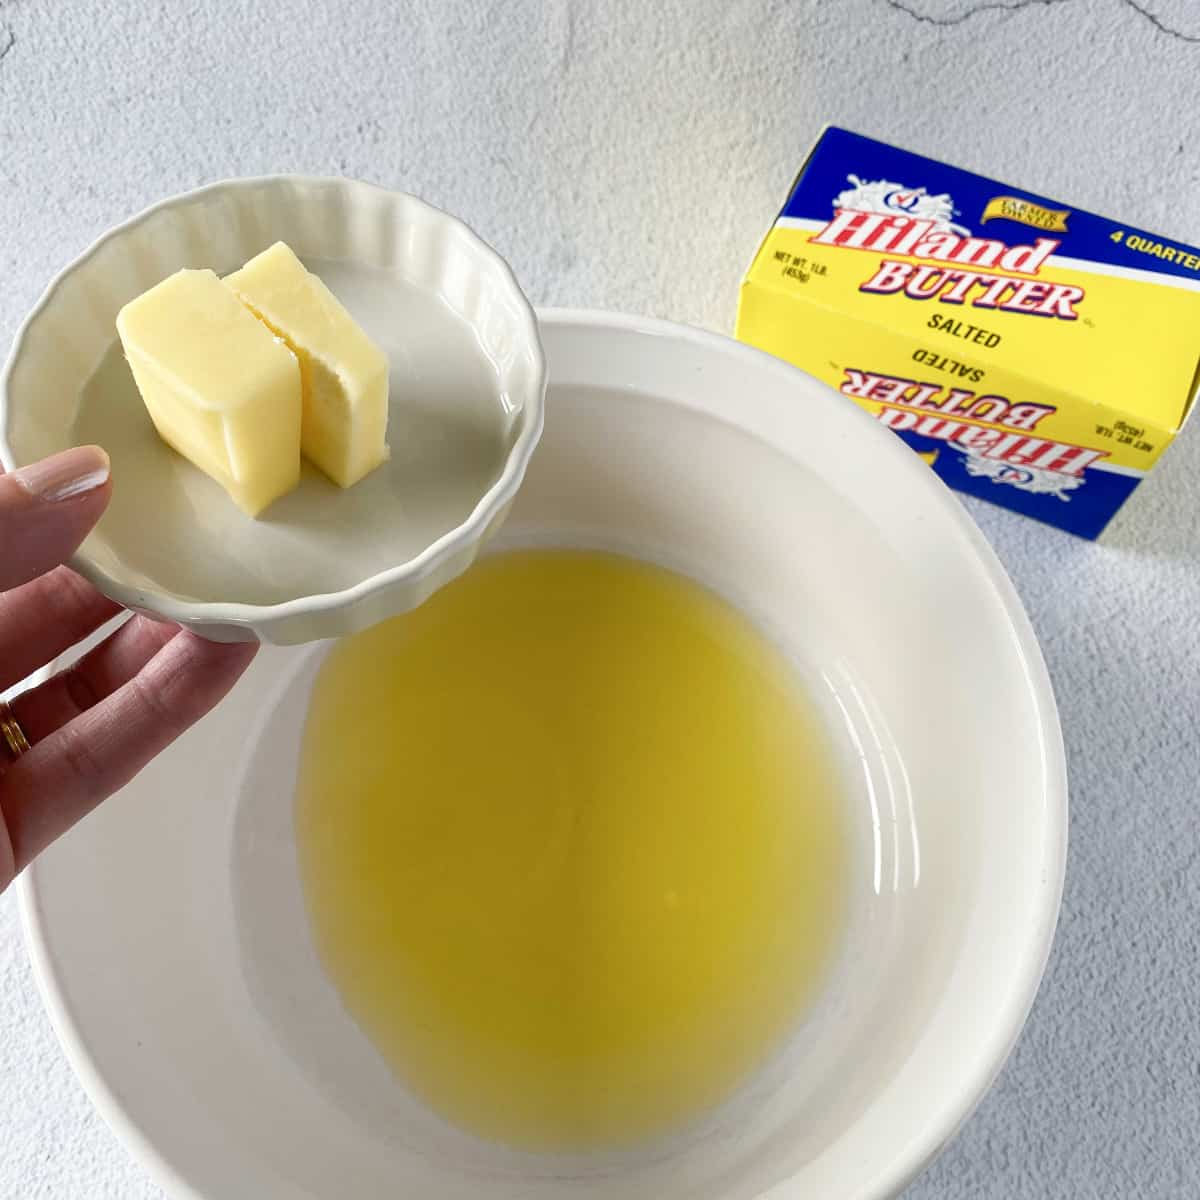 two tablespoons of Hiland Dairy butter being held over a bowl of olive oil in preparation for making olive oil buttermilk pancake batter.